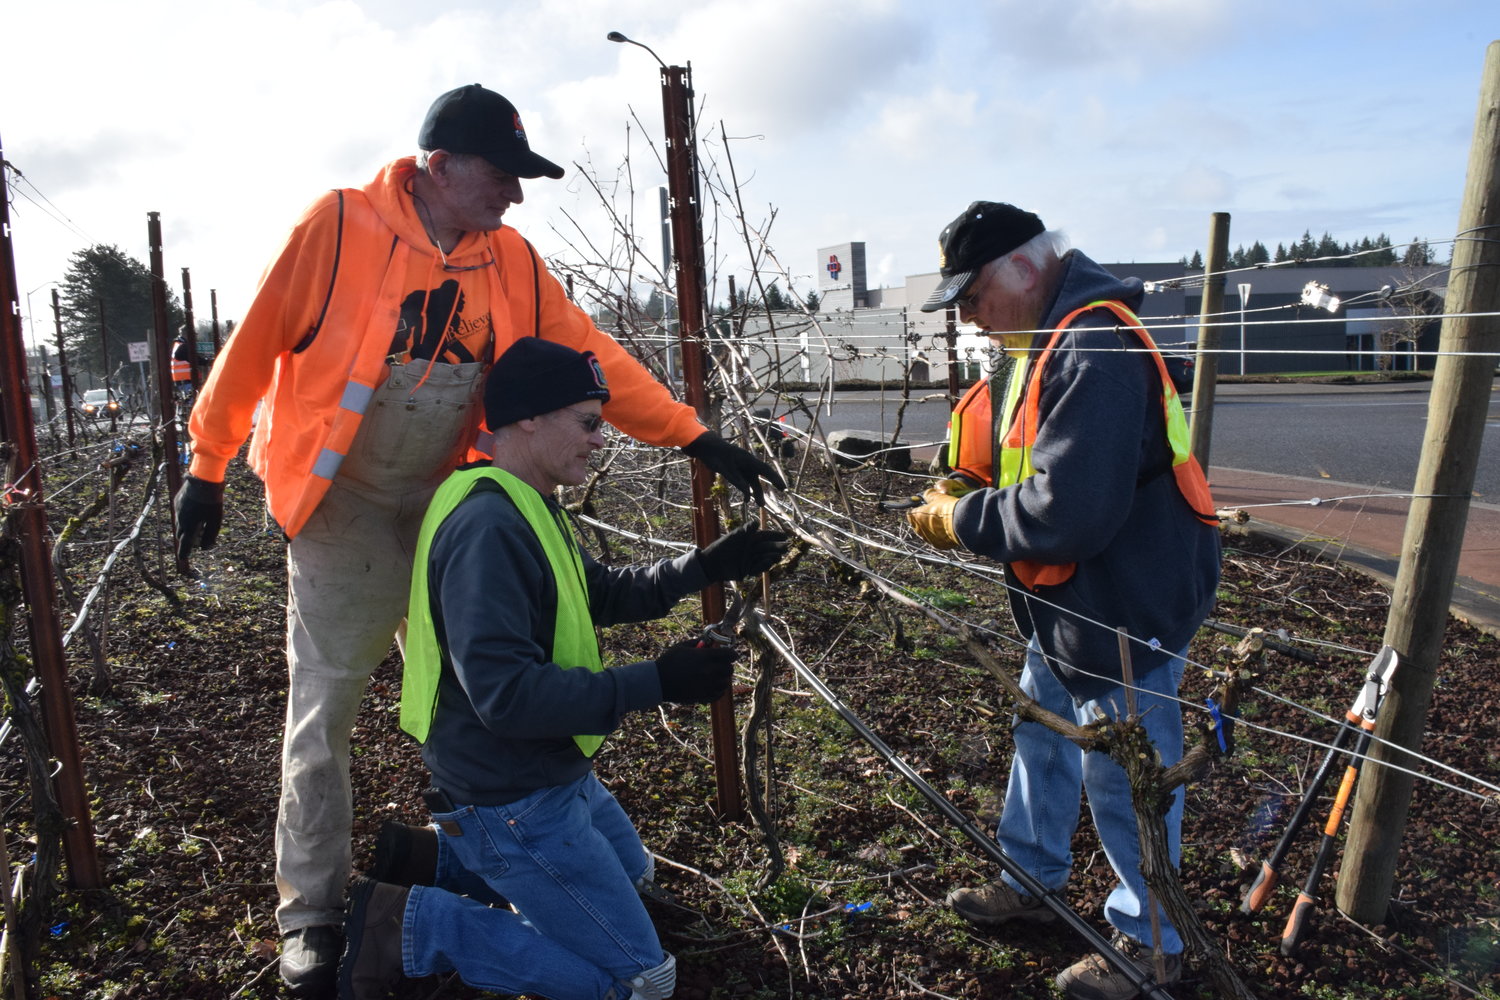 From left, Ridgefield councilors Ron Onslow and Rob Aichele, alongside resident Clyde Burkle, examine one of the vines at the 56th Place and Pioneer Street roundabout on Feb. 5.